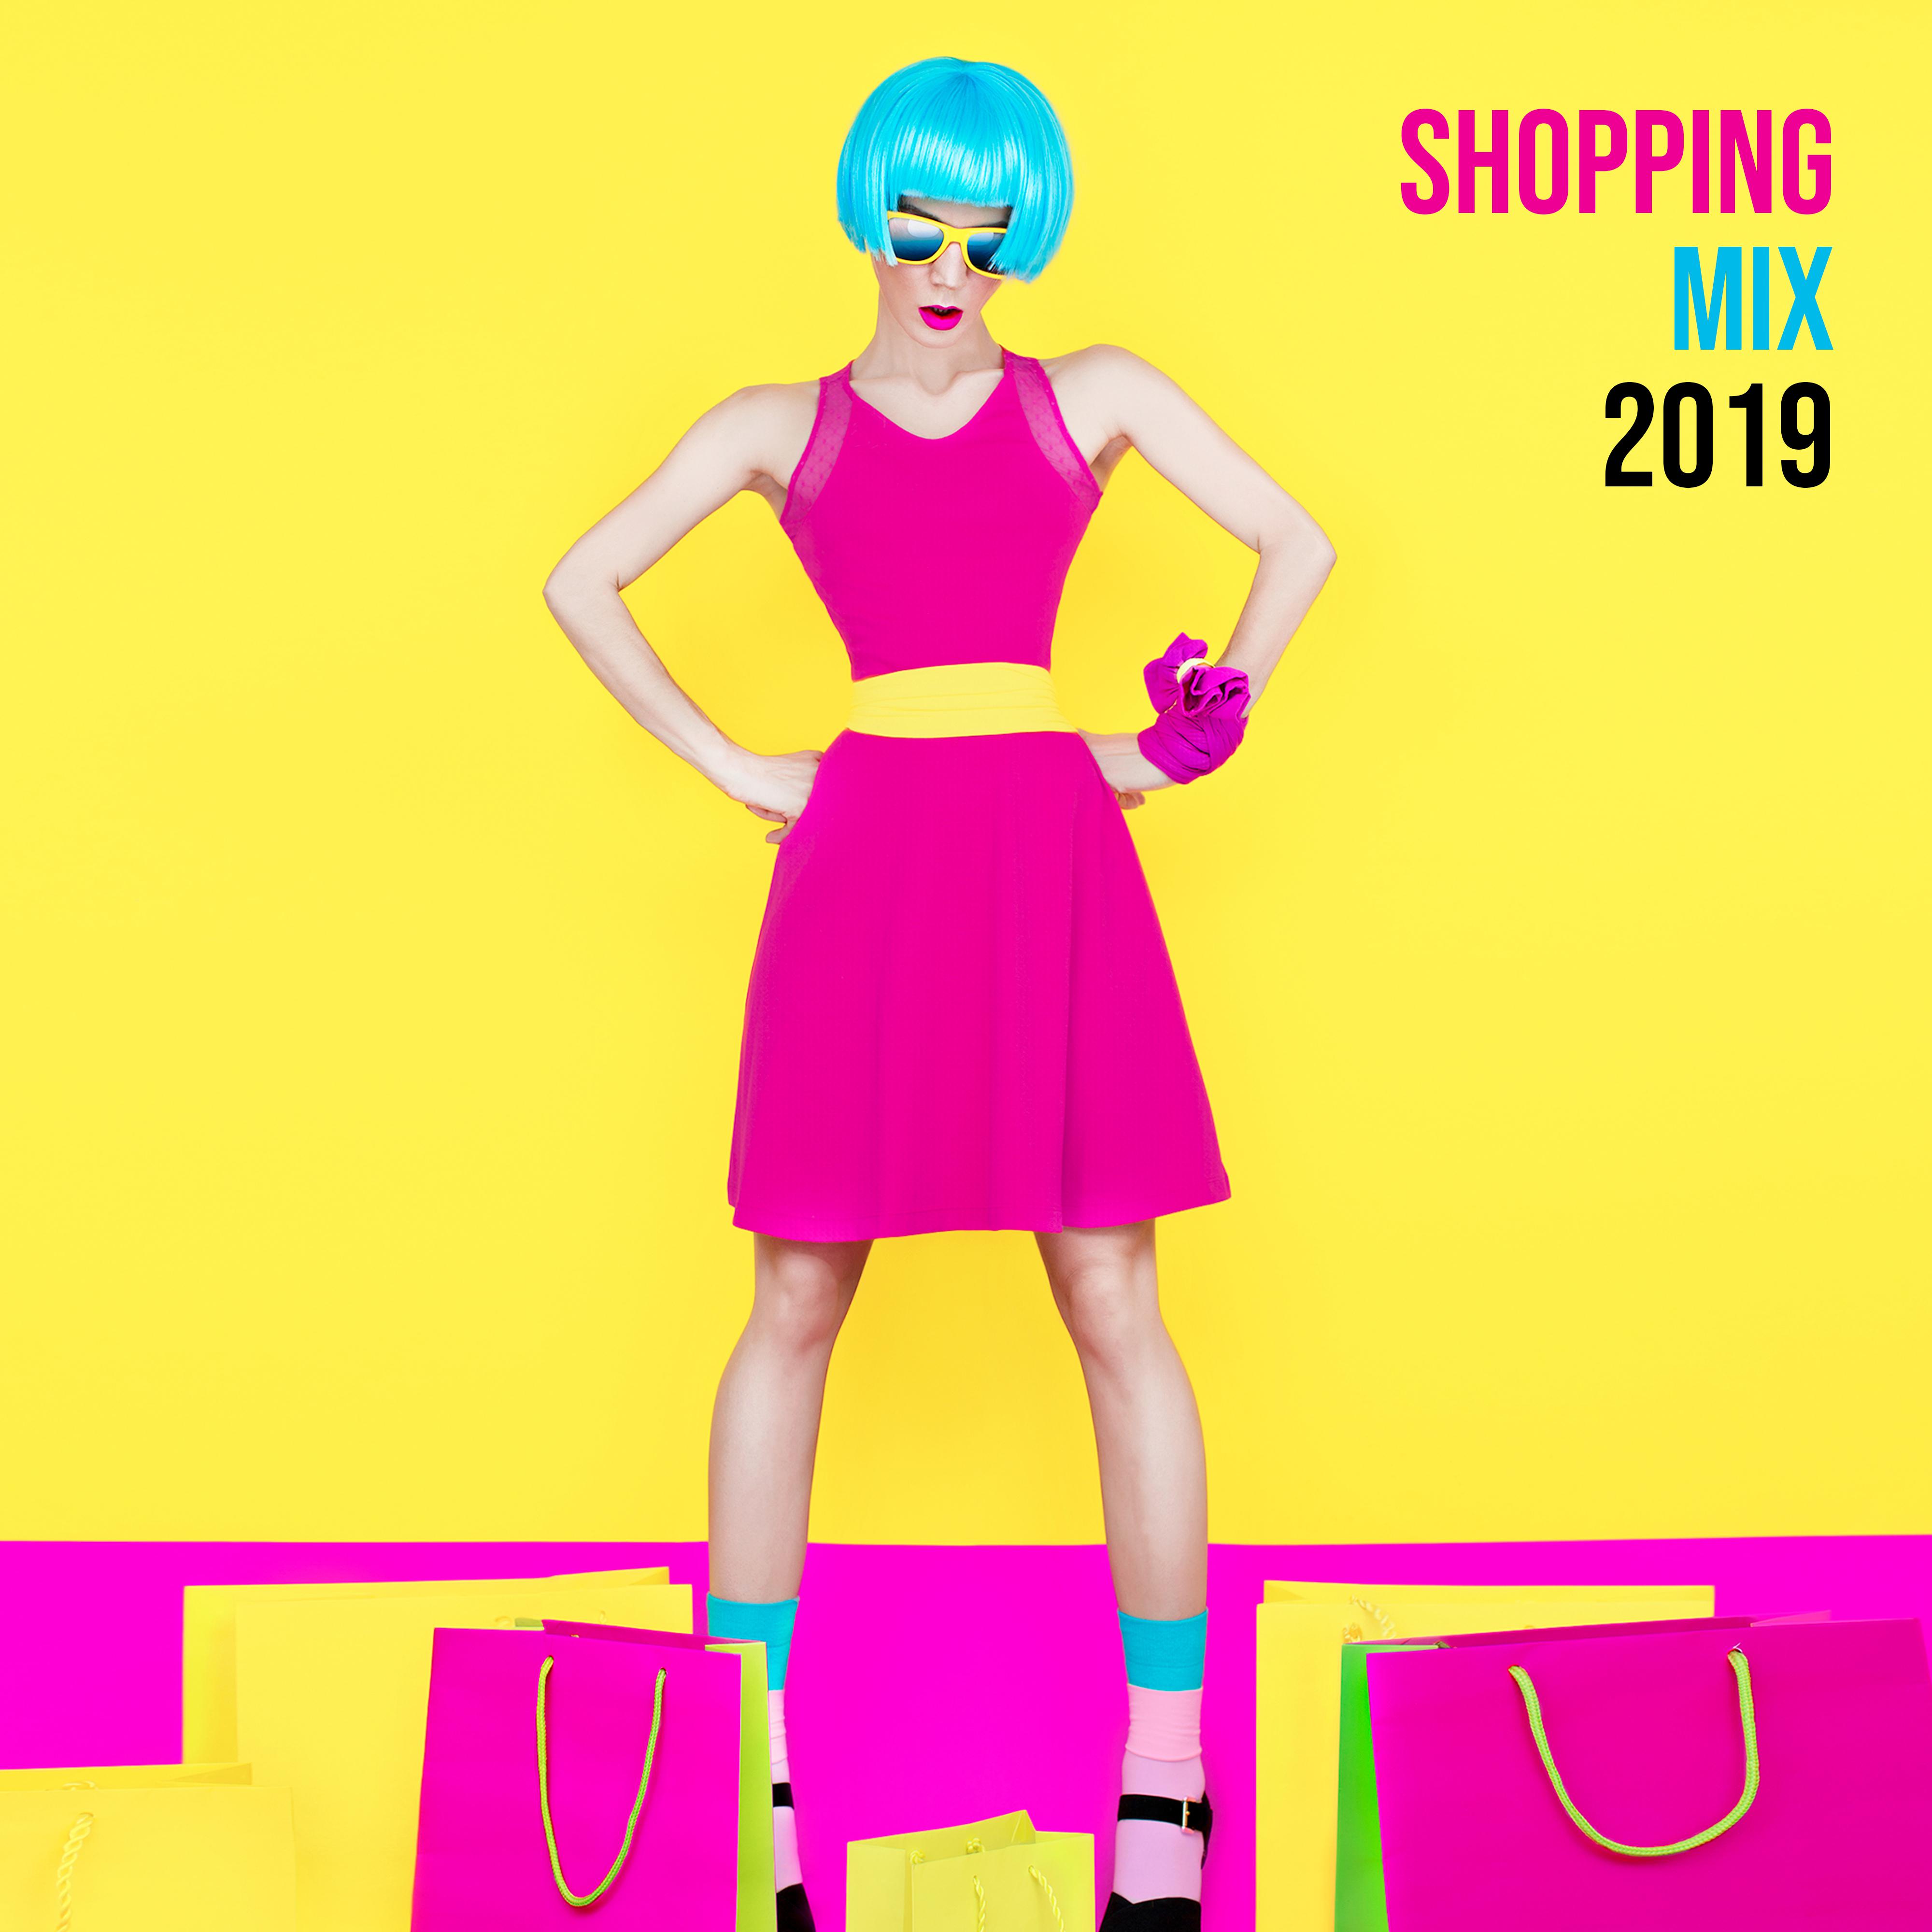 Shopping Mix 2019 – Deep Tunes for Shop